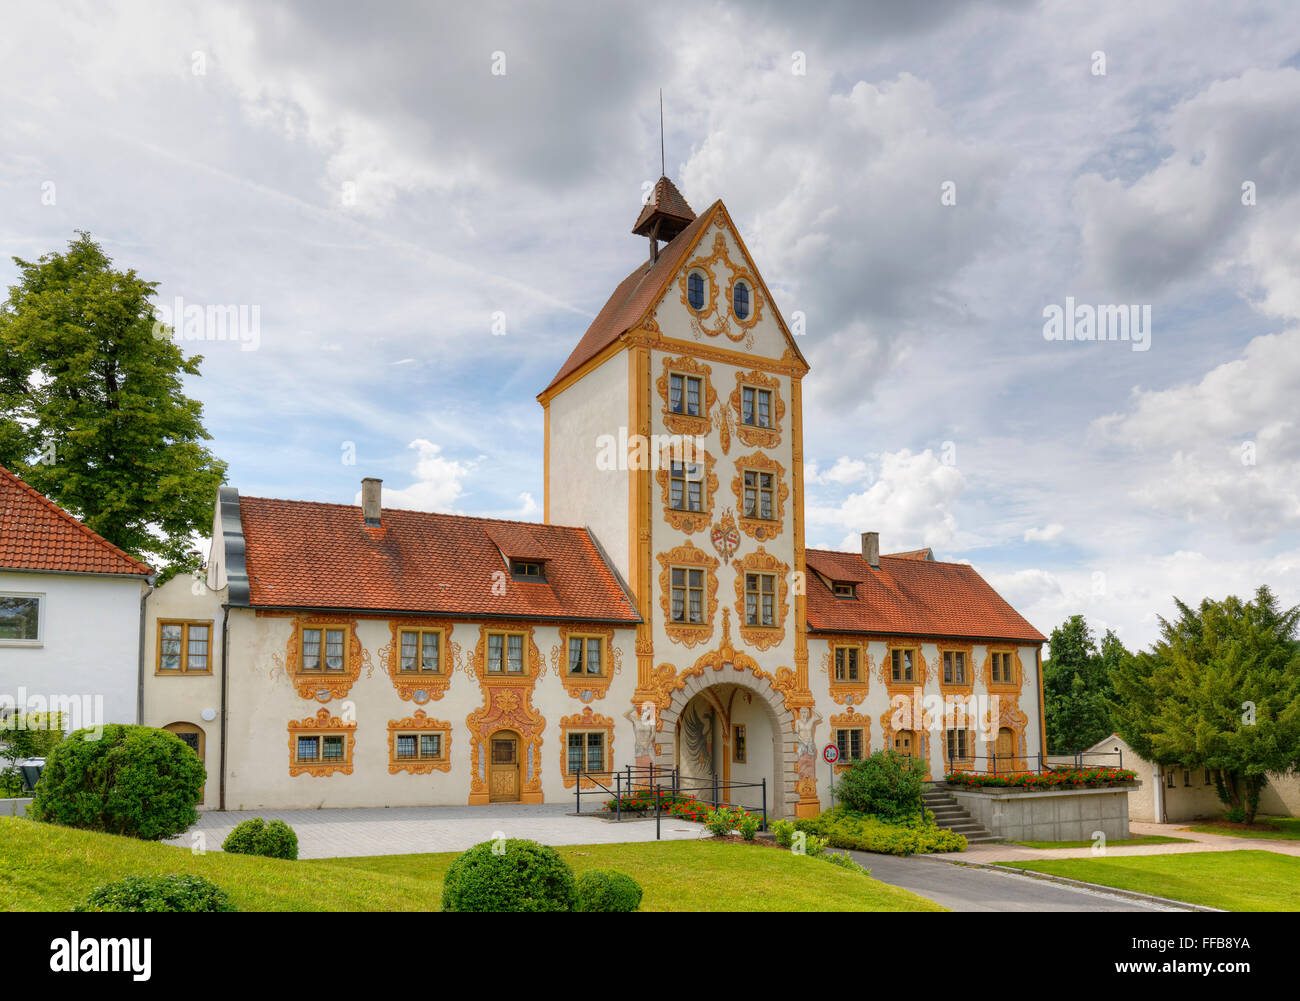 West Gate, city gate en Rot an der Rot, Suabia superior, suabia, Baden-Württemberg, Alemania Foto de stock